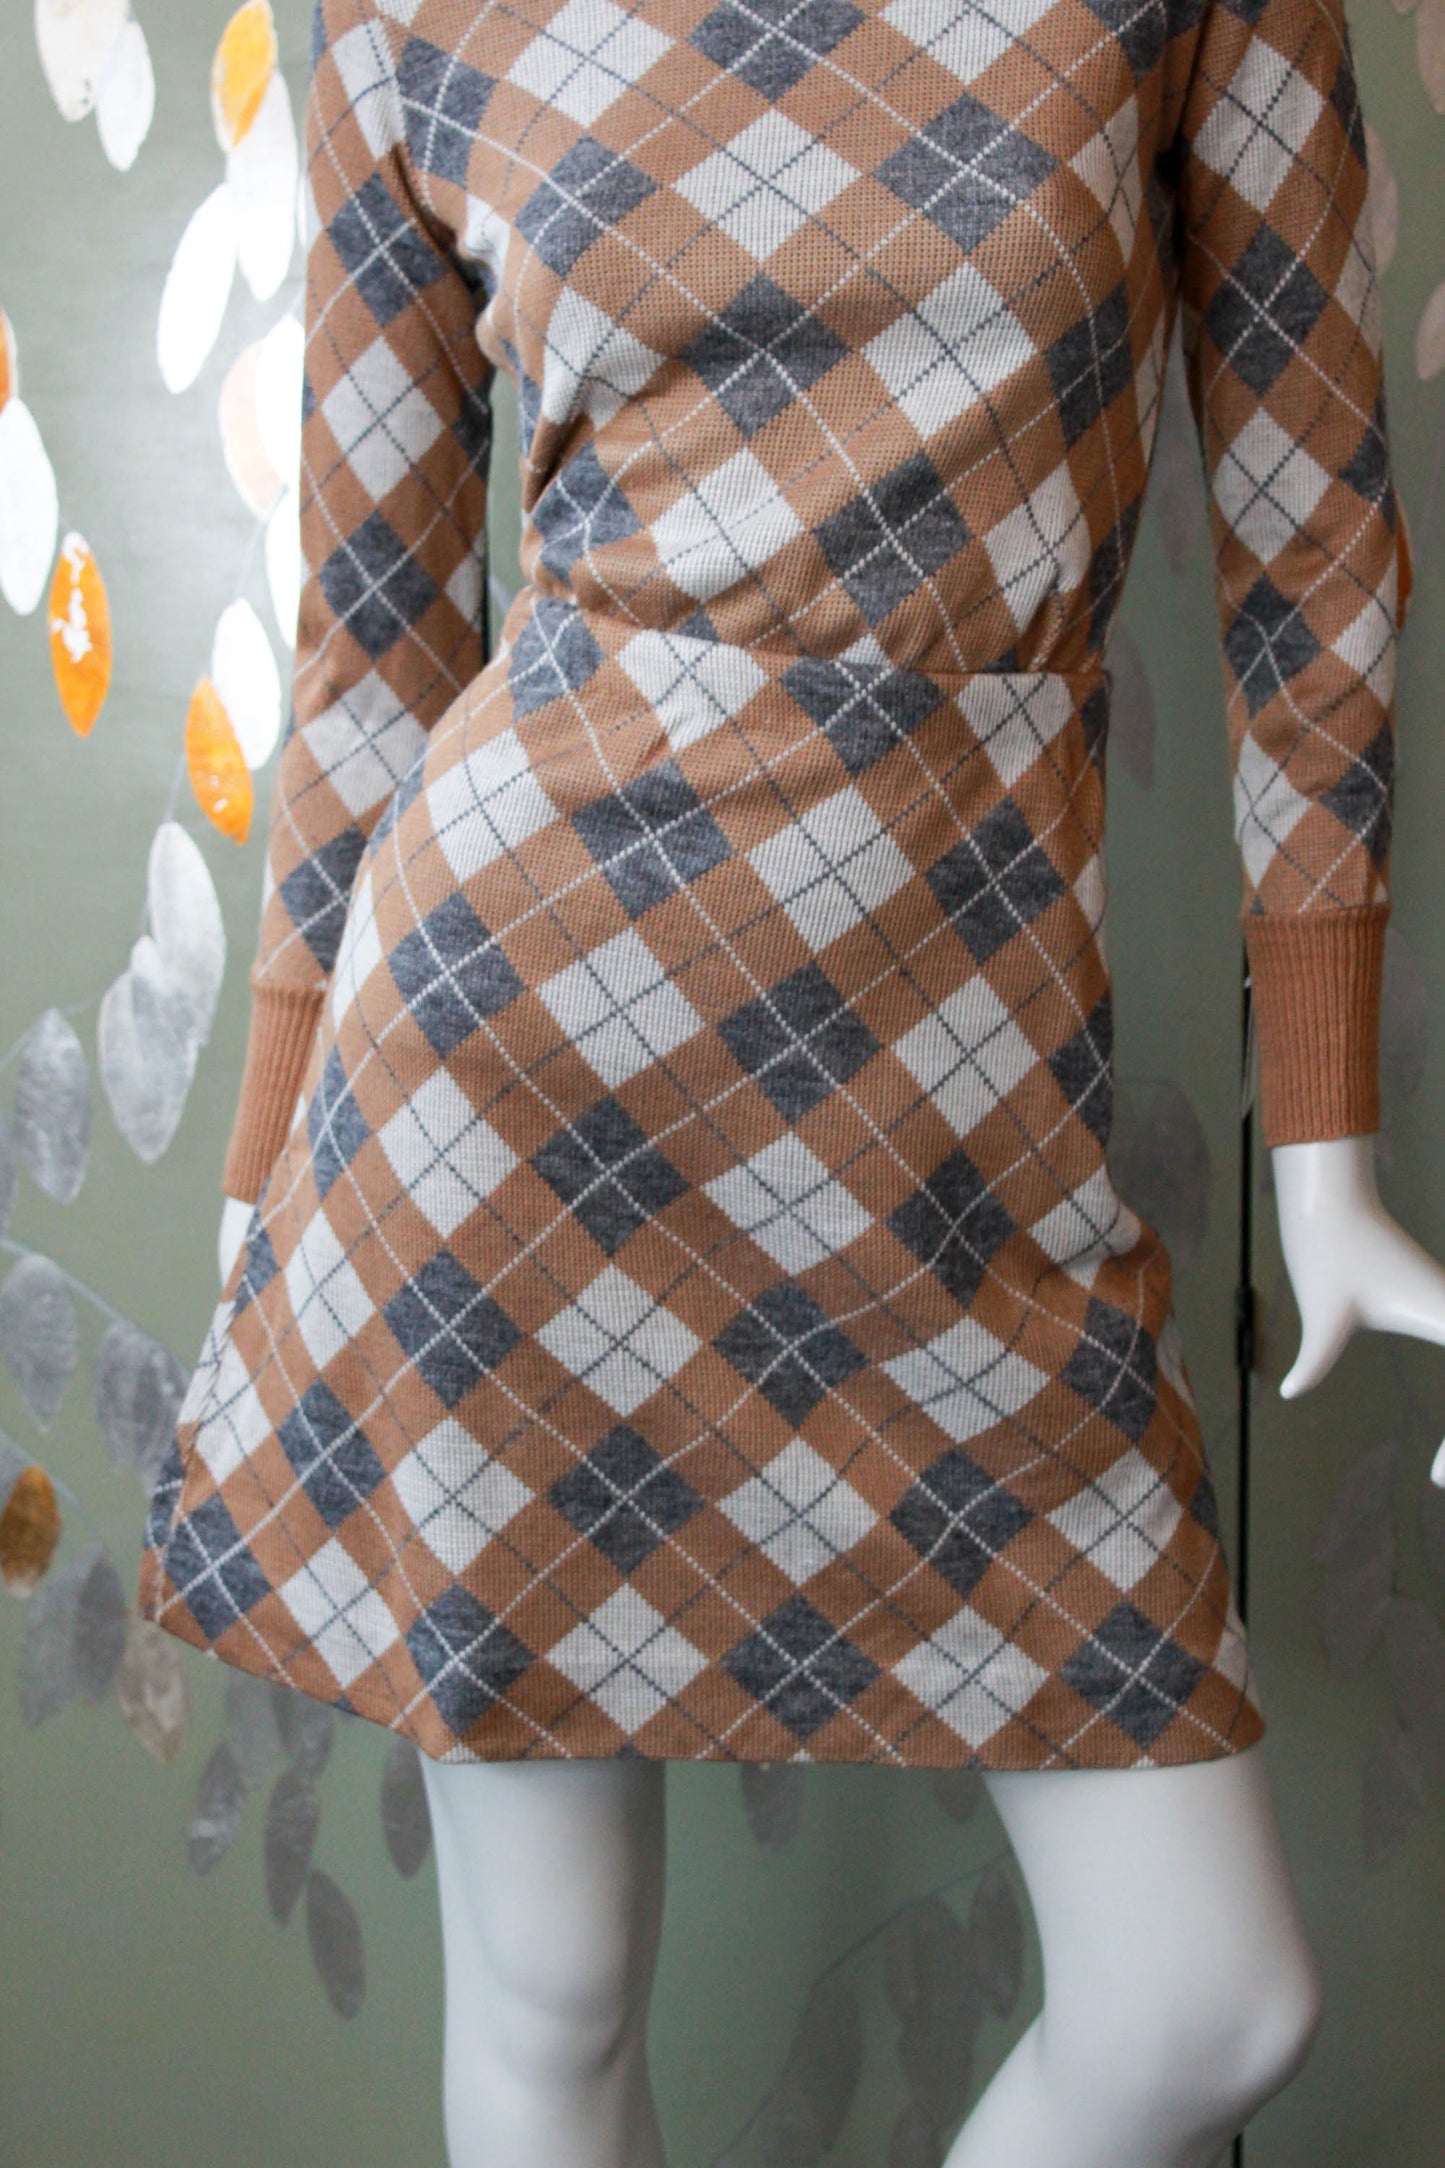 1980s deadstock argyle knit sweater and skirt matching set, cher horowitz preppy style, camel white and grey argyle plaid. mini skirt